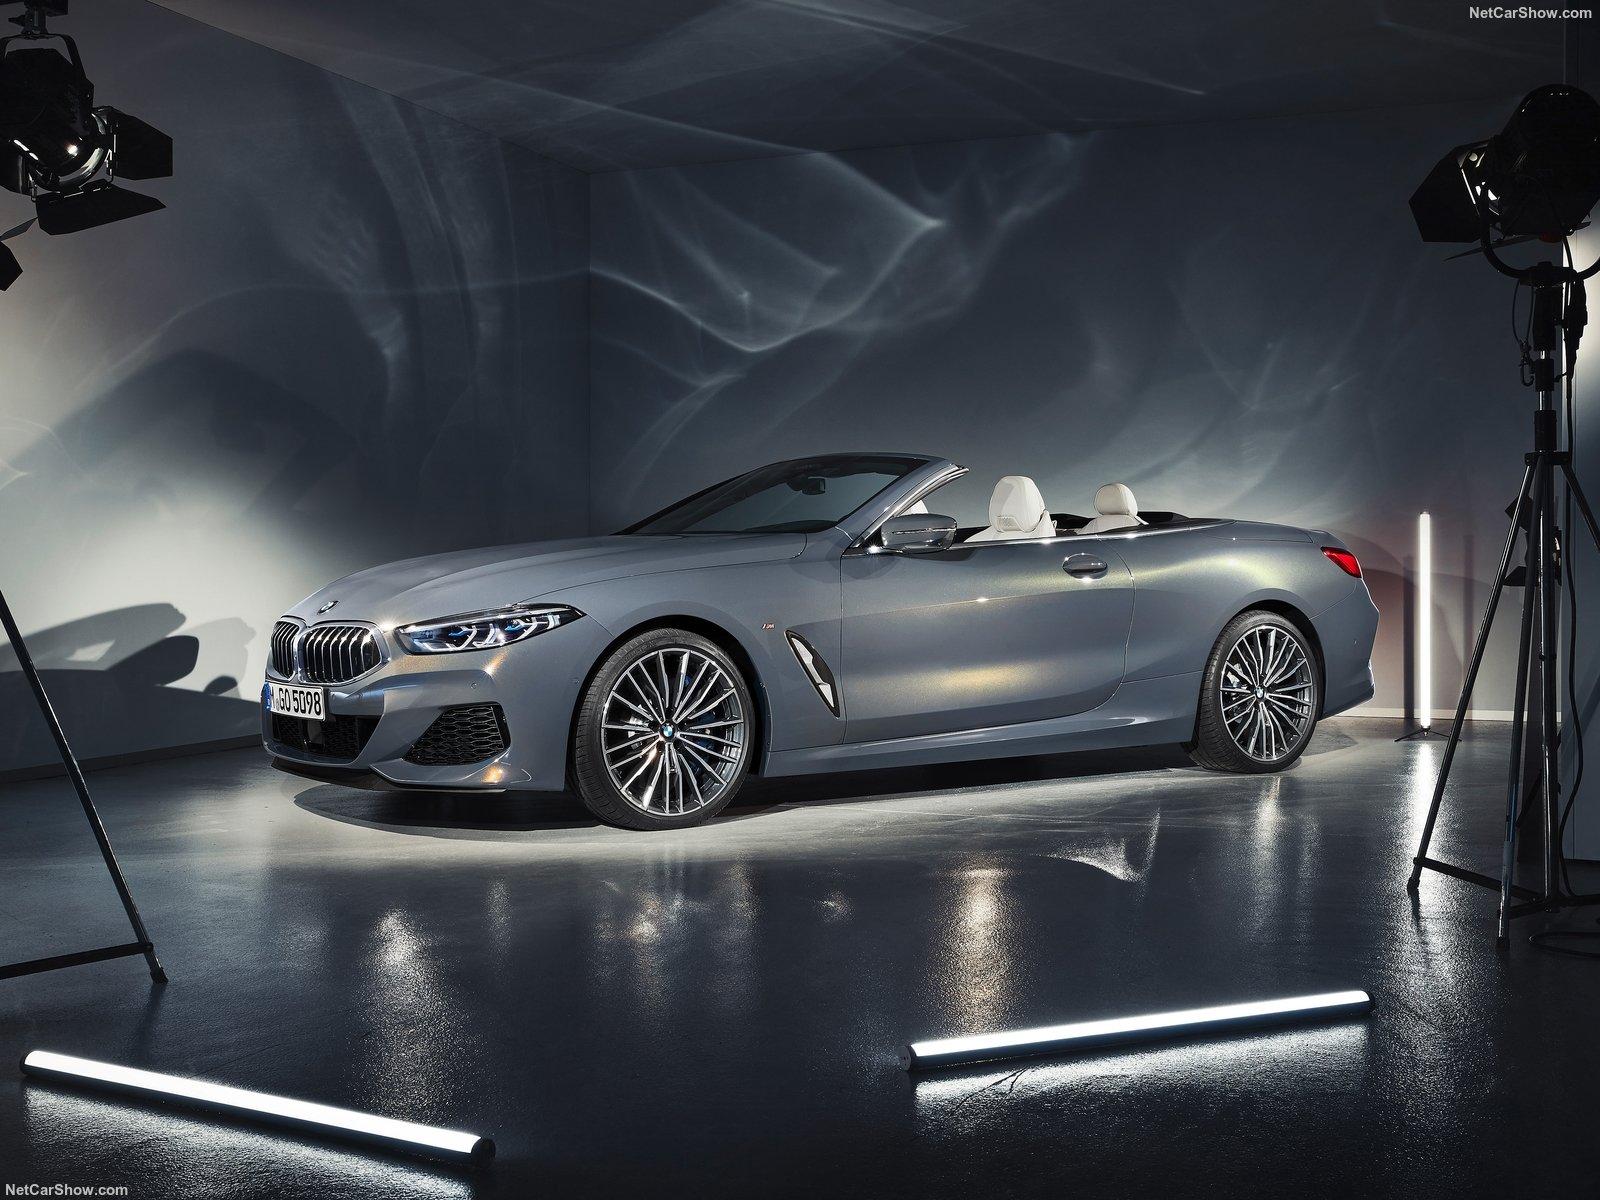 BMW 8 Series Convertible Picture. BMW Photo Gallery